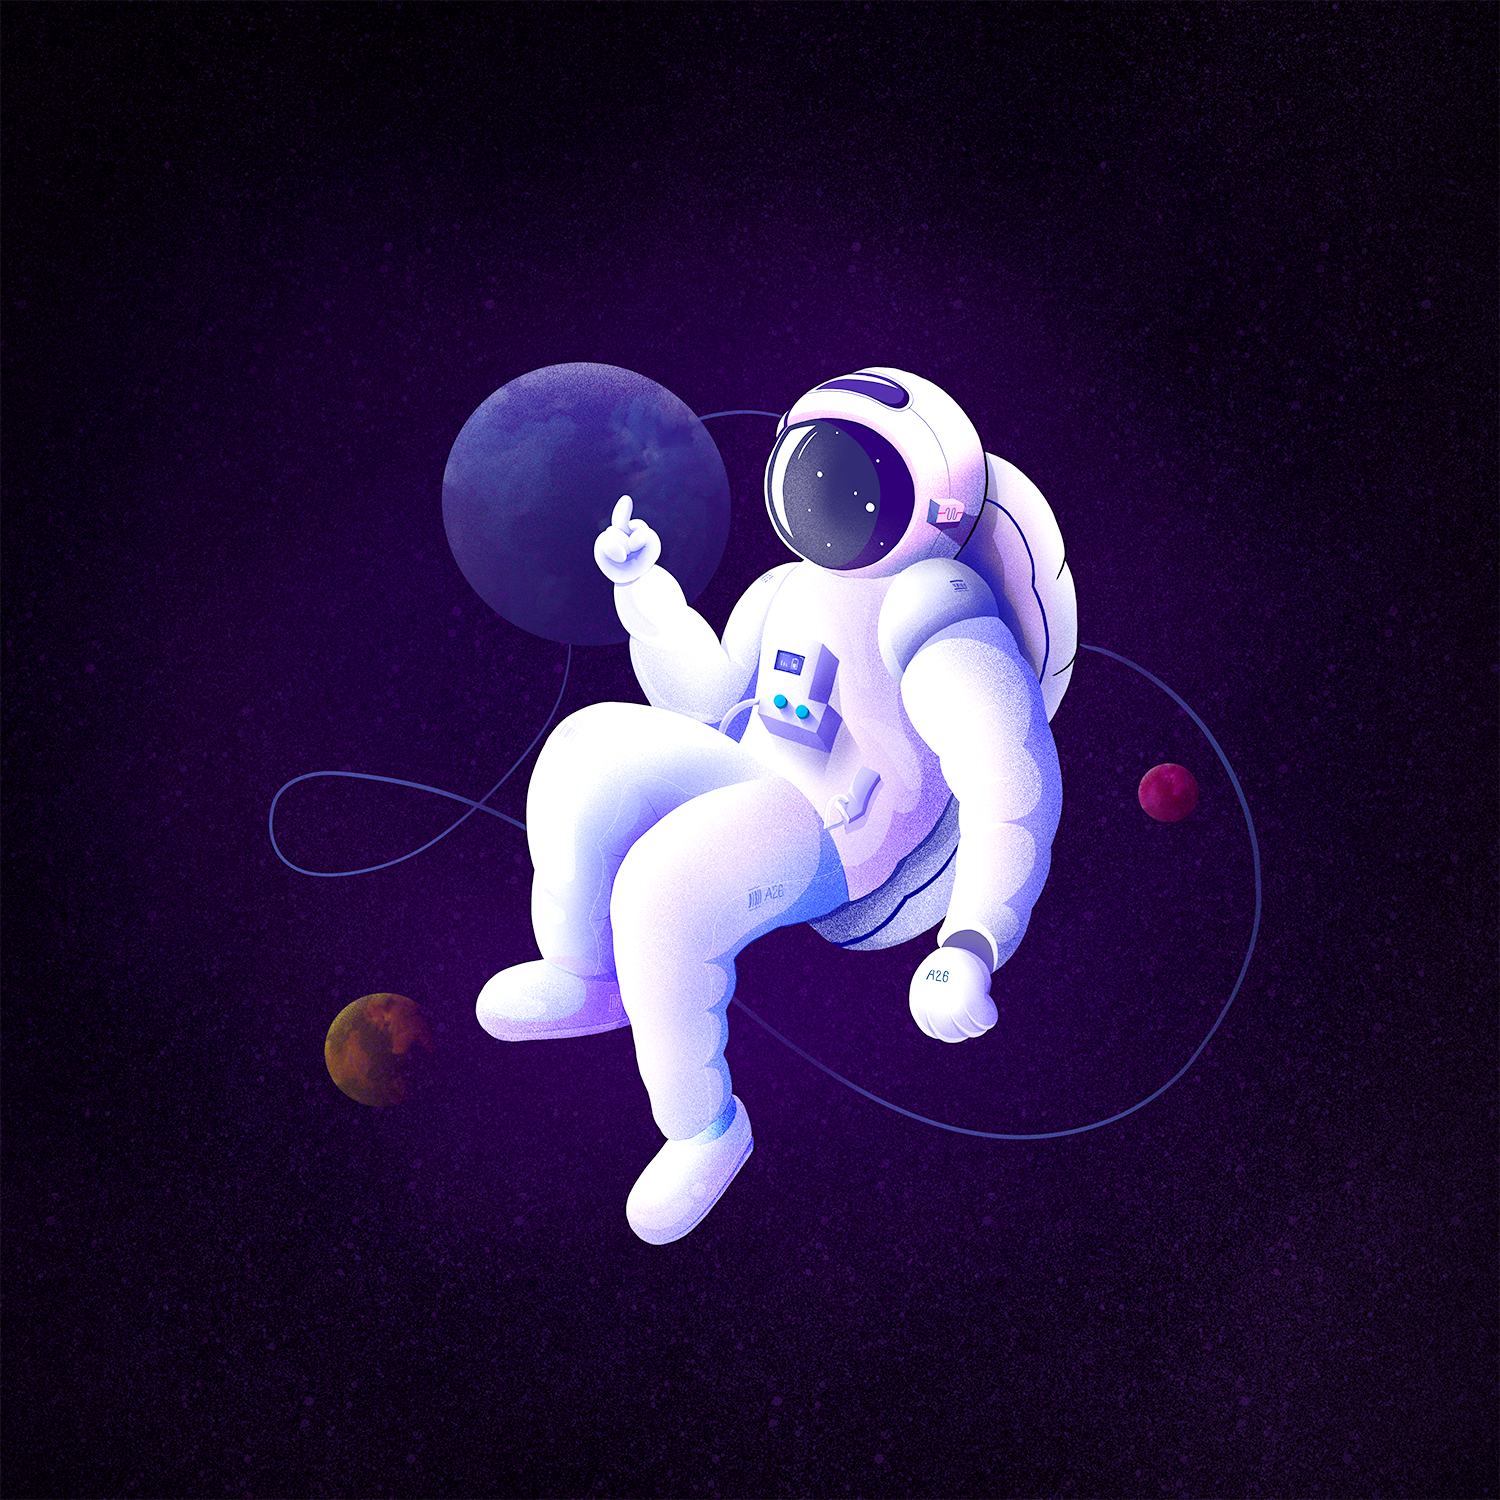 This one space. Человечек in Space. INSPACE человечек. Space Cosmonaut. Out of Space.